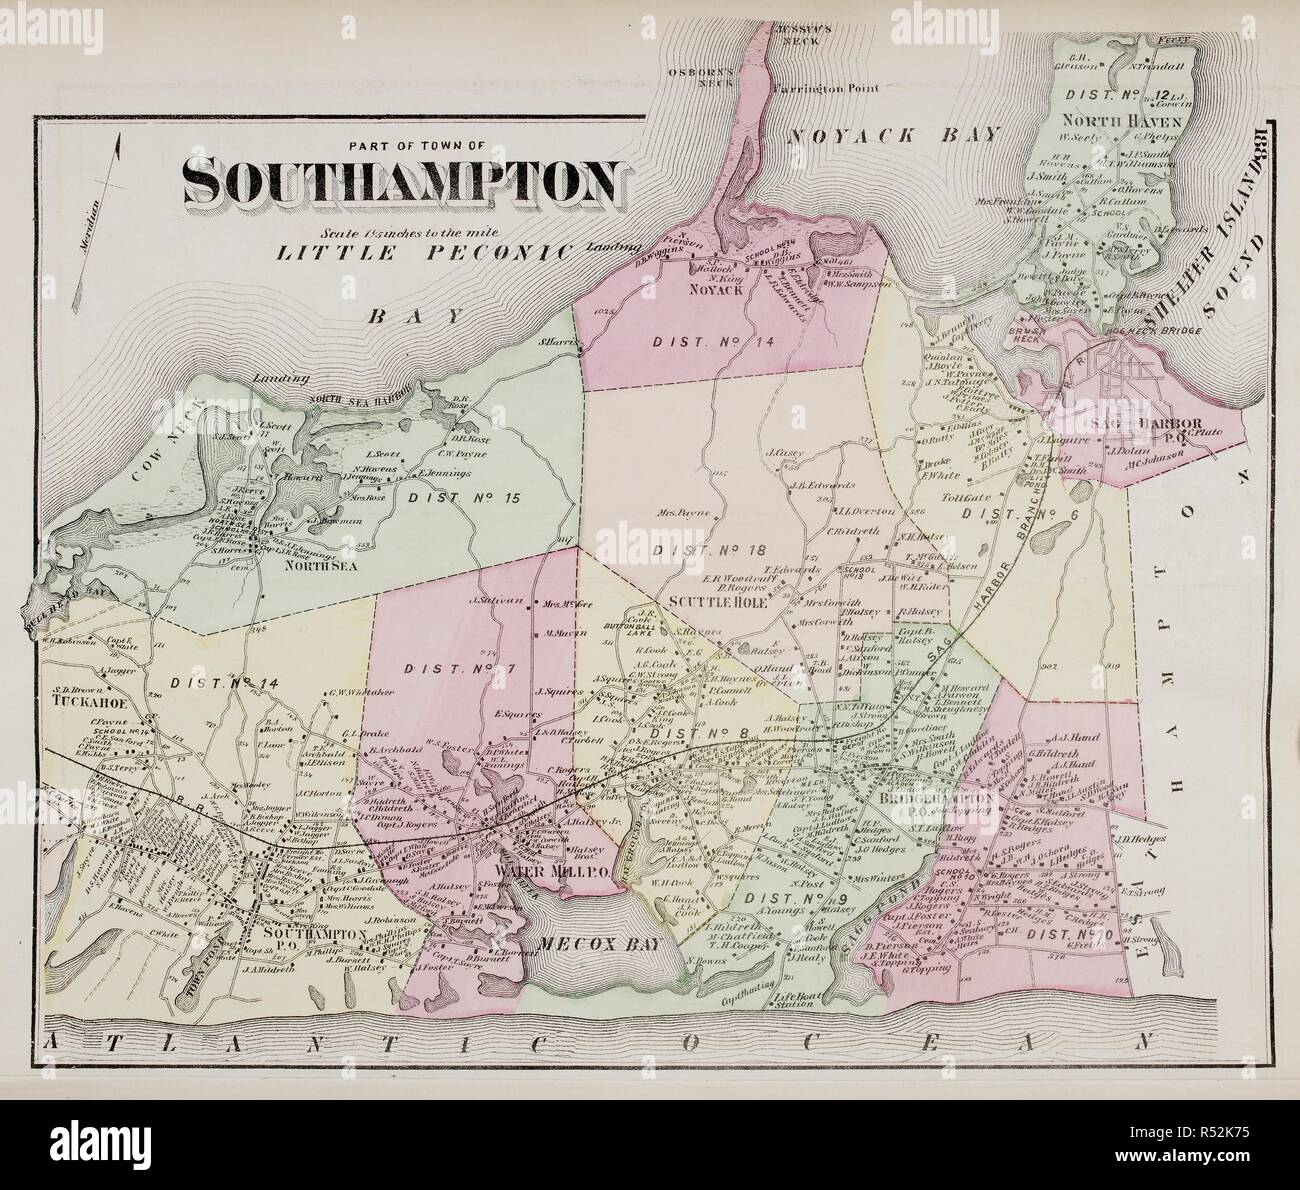 Map of Southampton, on Long Island New York in the United States. . Atlas of Long Island, New York. From recent and actual Surveys and Records under the superintendence of F.W. Beers. New York, 1873. Source: Maps.33.d.17 f.188. Language: English. Stock Photo